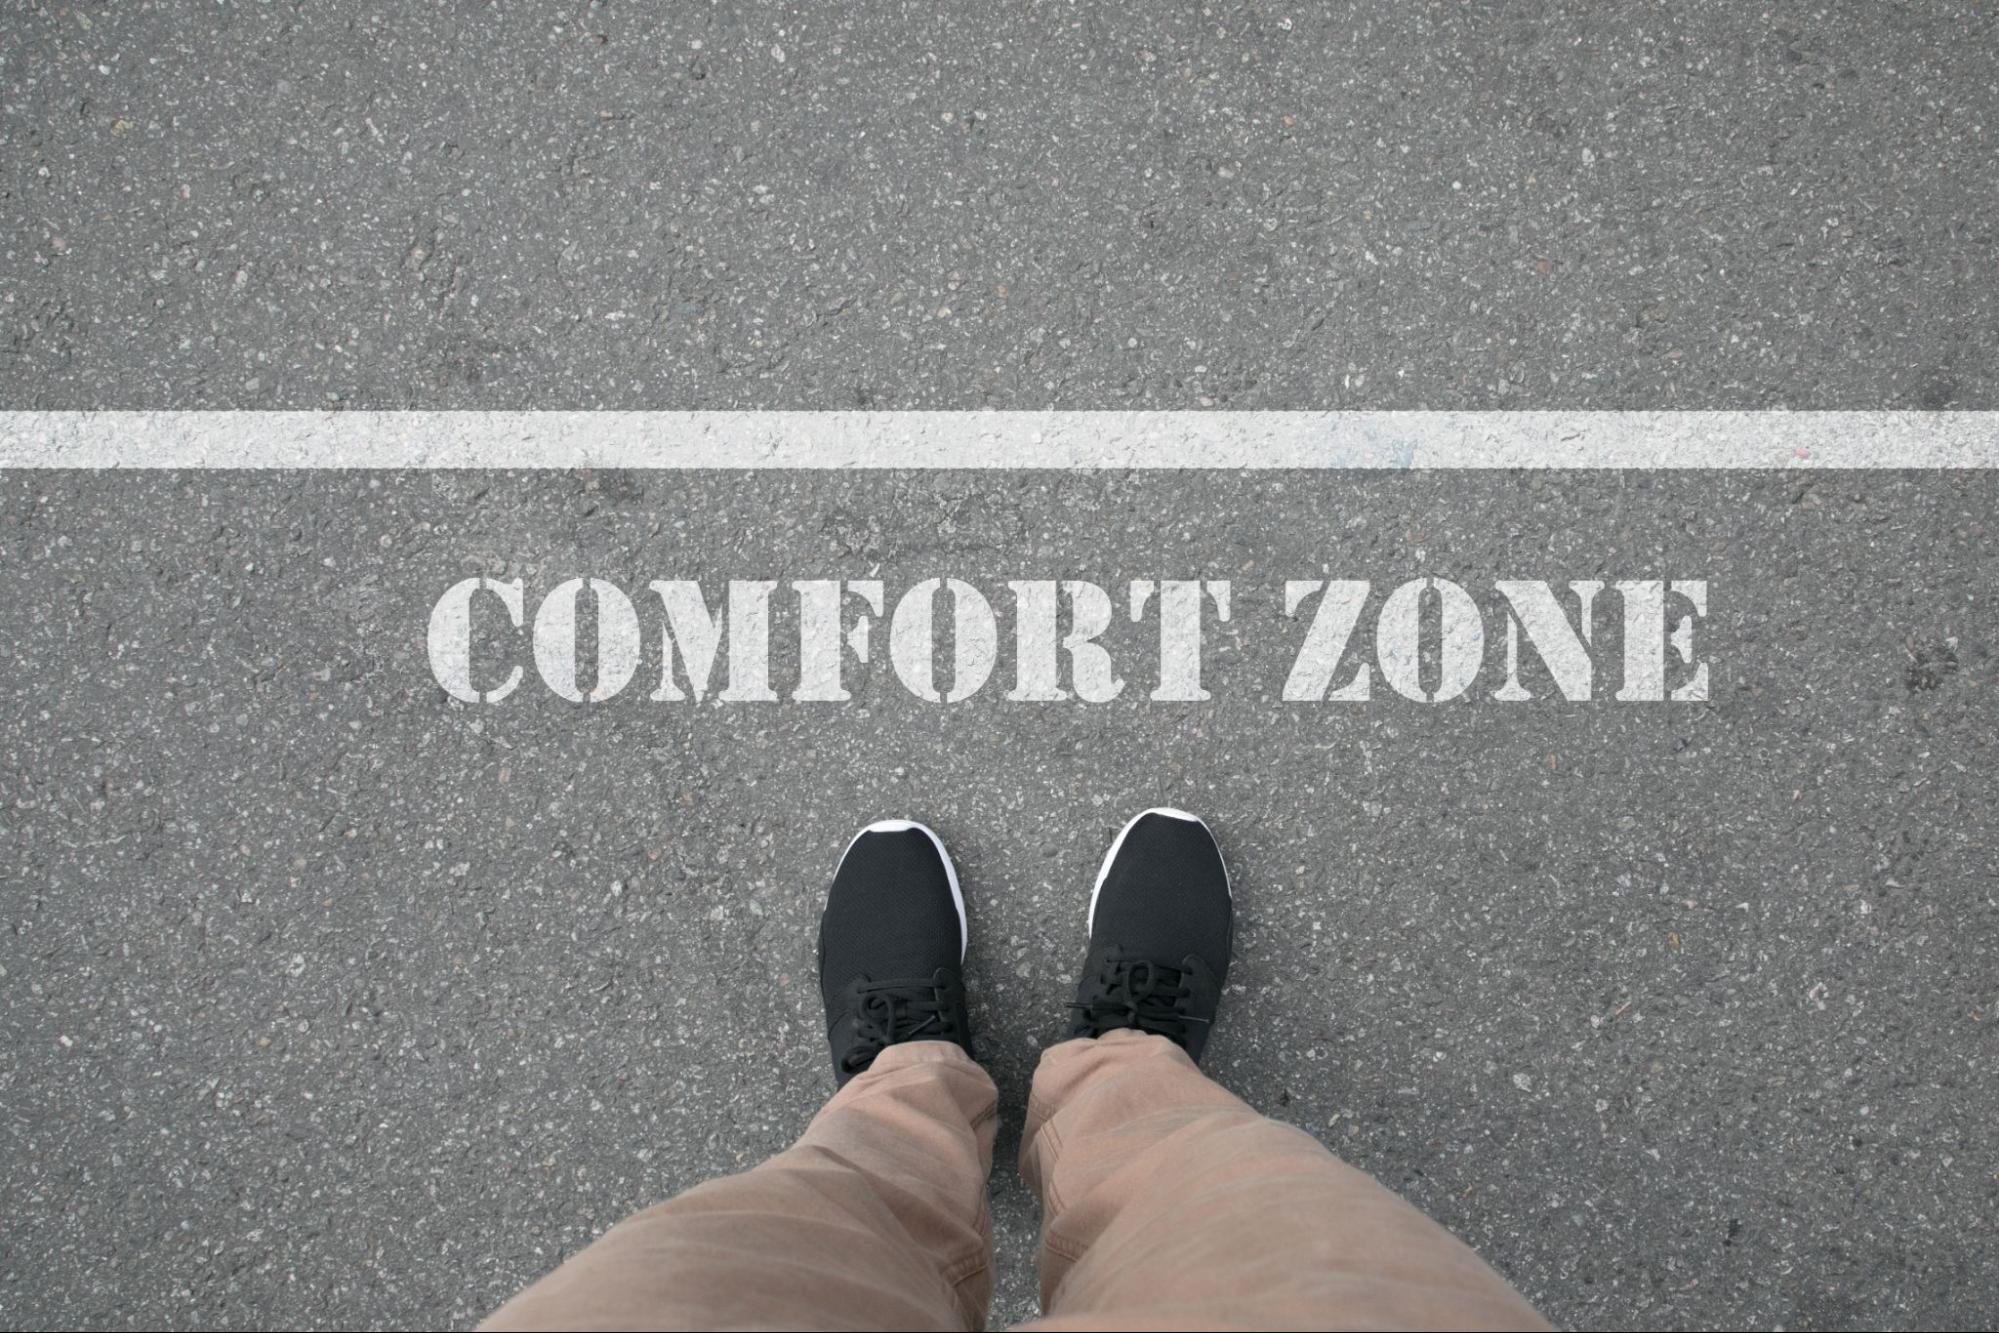 Shoes standing on an asphalt road in front of the words ‘comfort zone’ stenciled in white